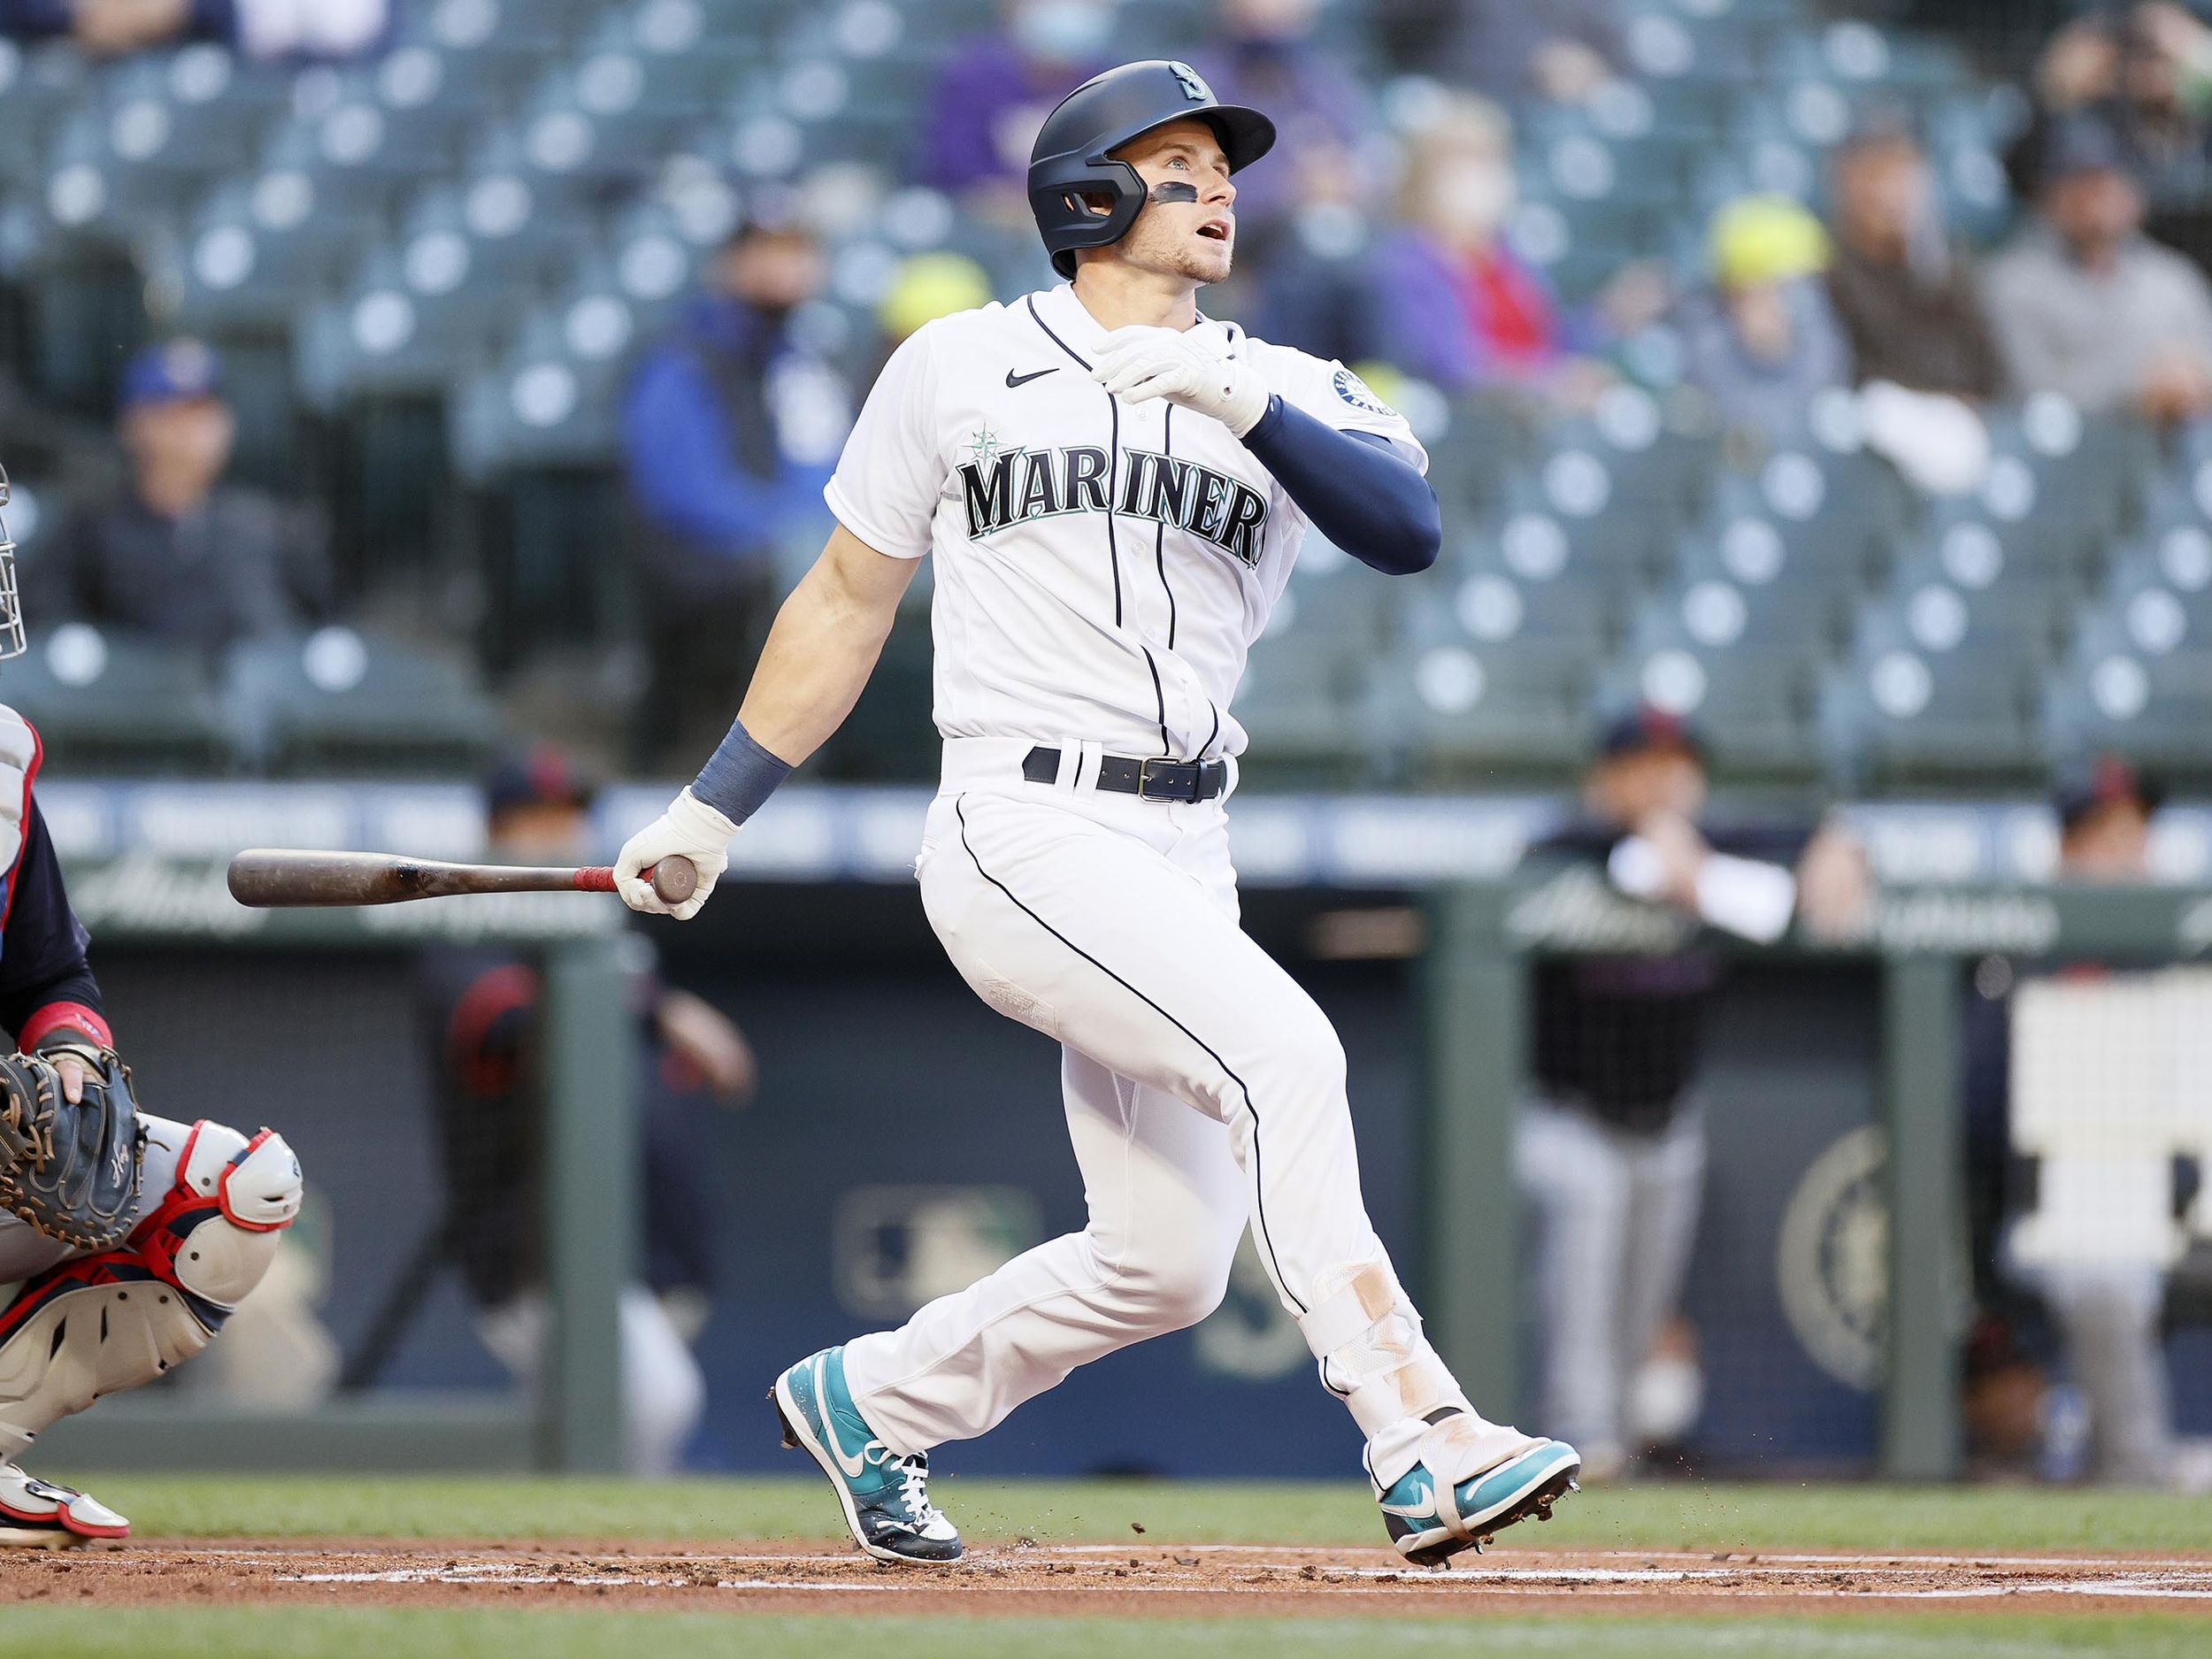 Mariners' path to better baseball isn't trades, but here are three